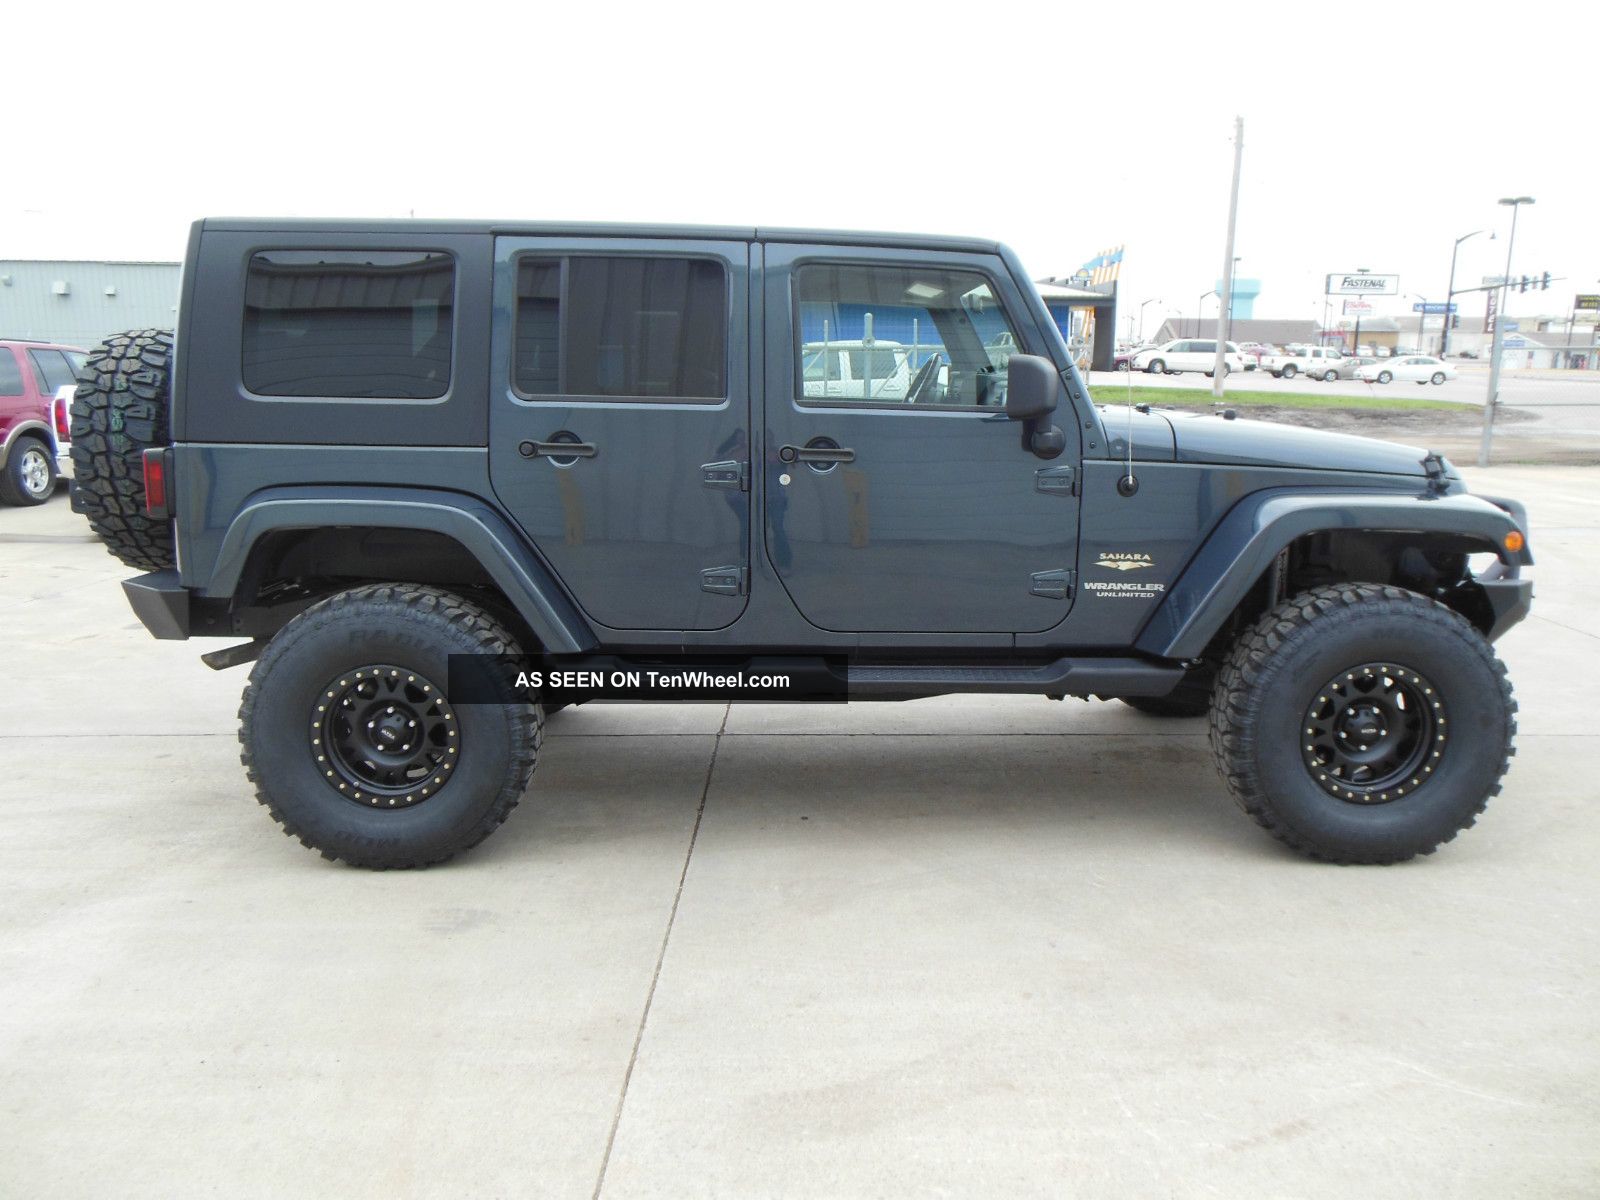 2008 Jeep wrangler unlimited hard tops #3